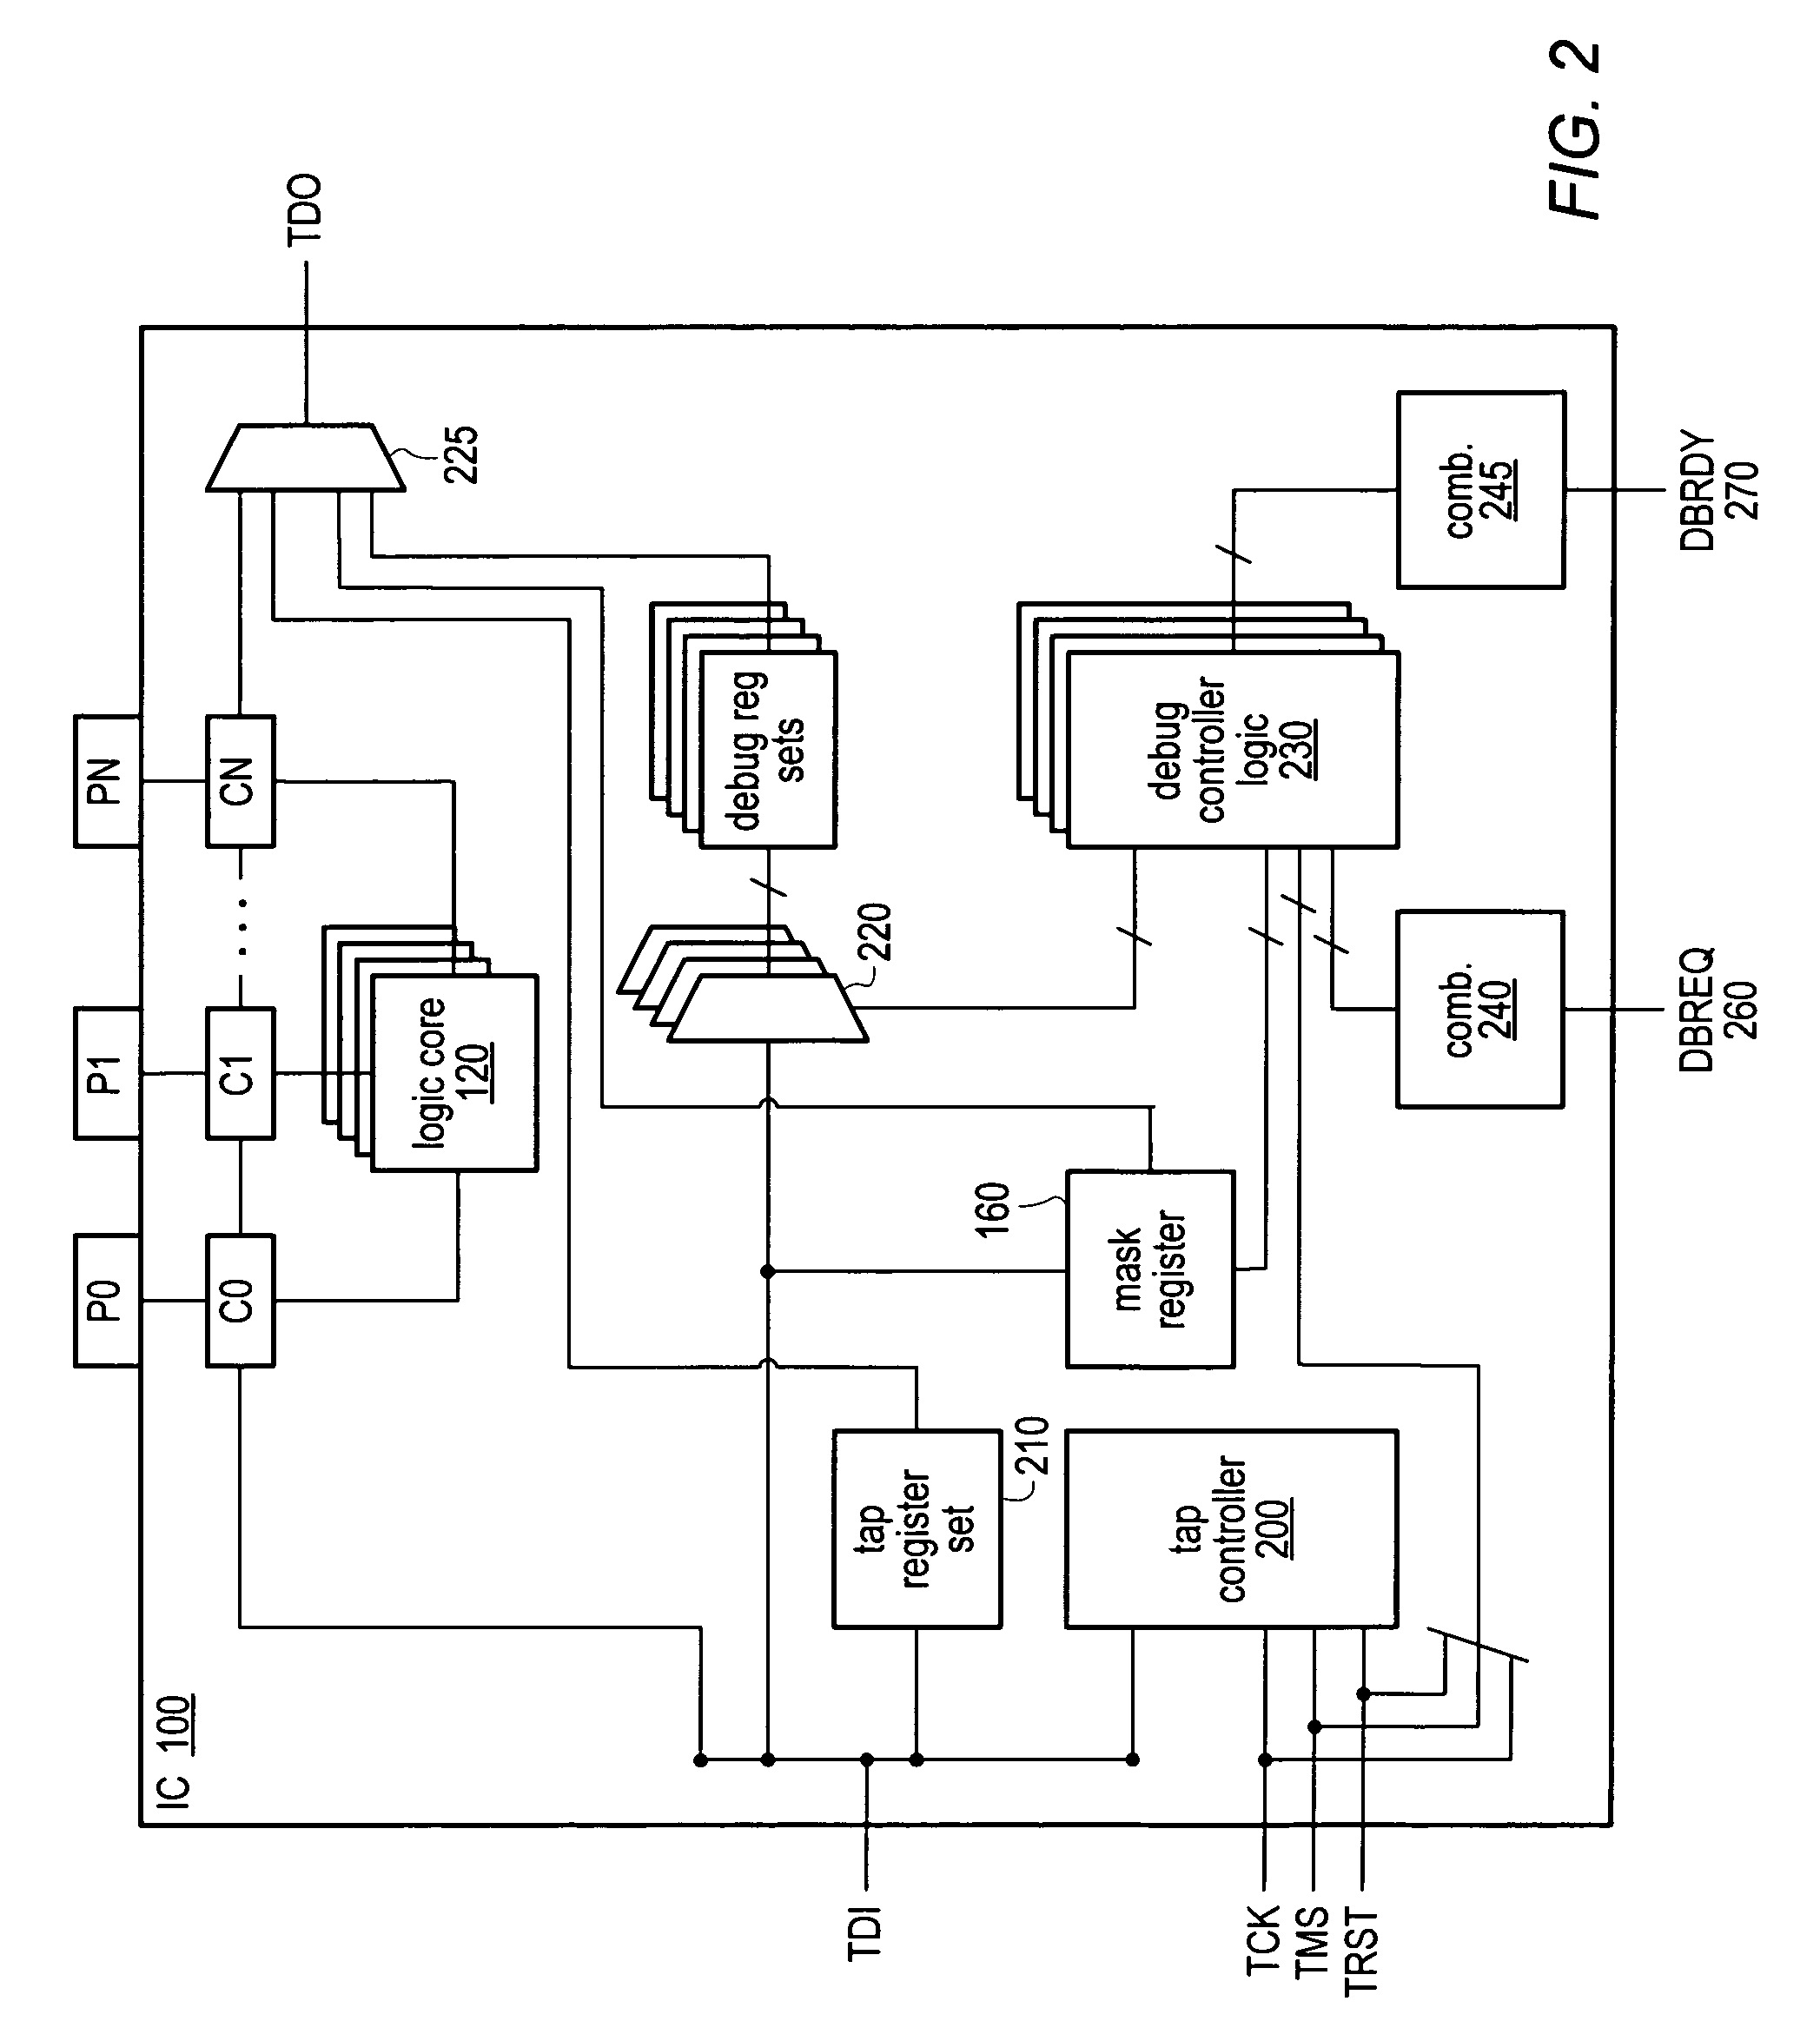 Multi-core integrated circuit with shared debug port